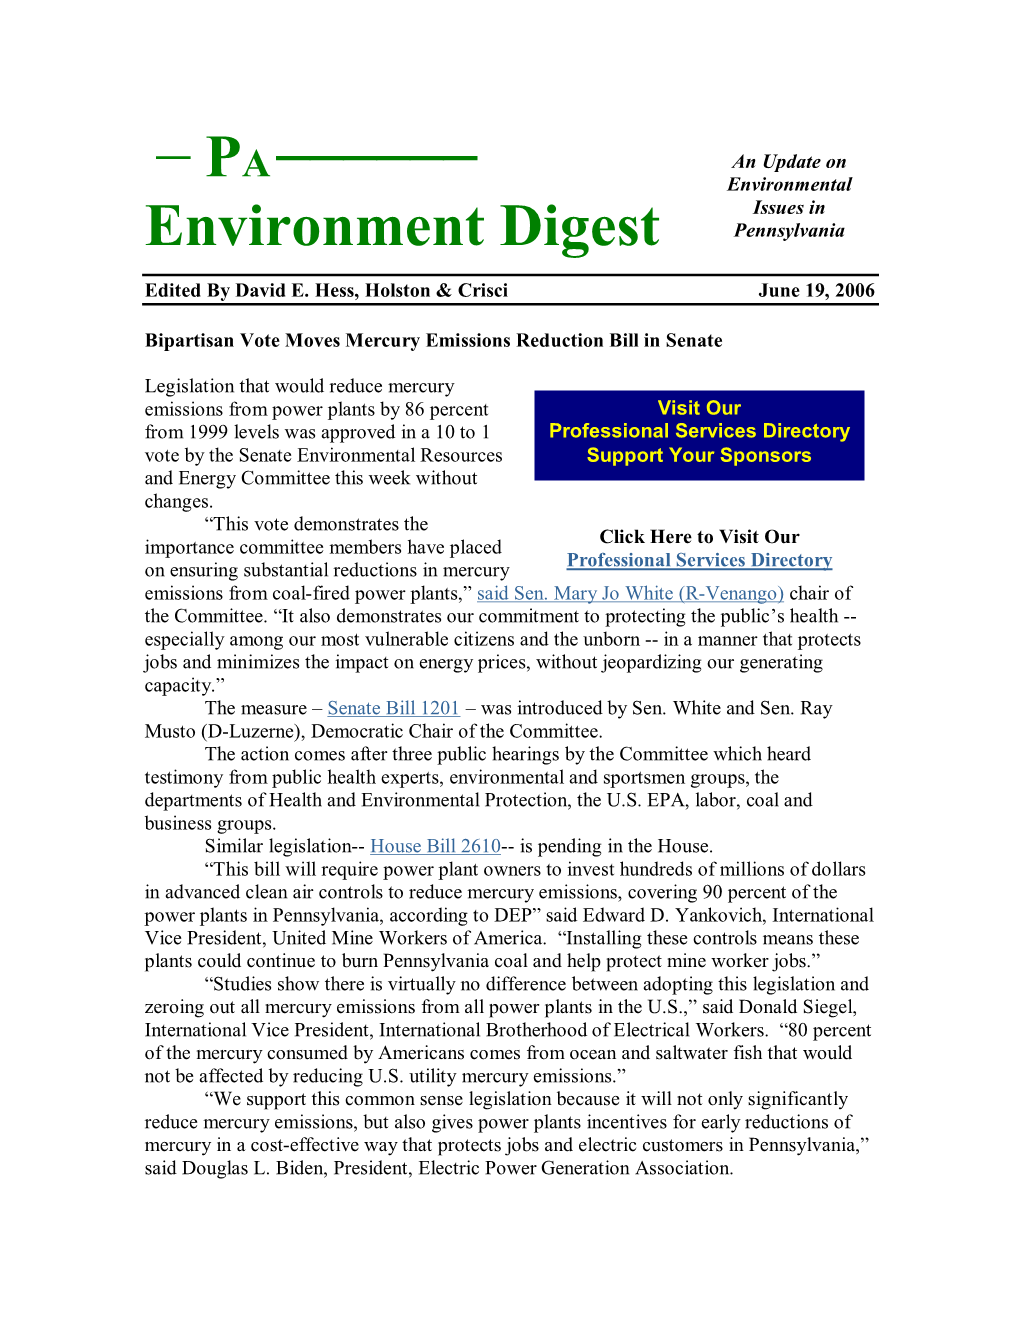 PA Environment Digest 6/19/06